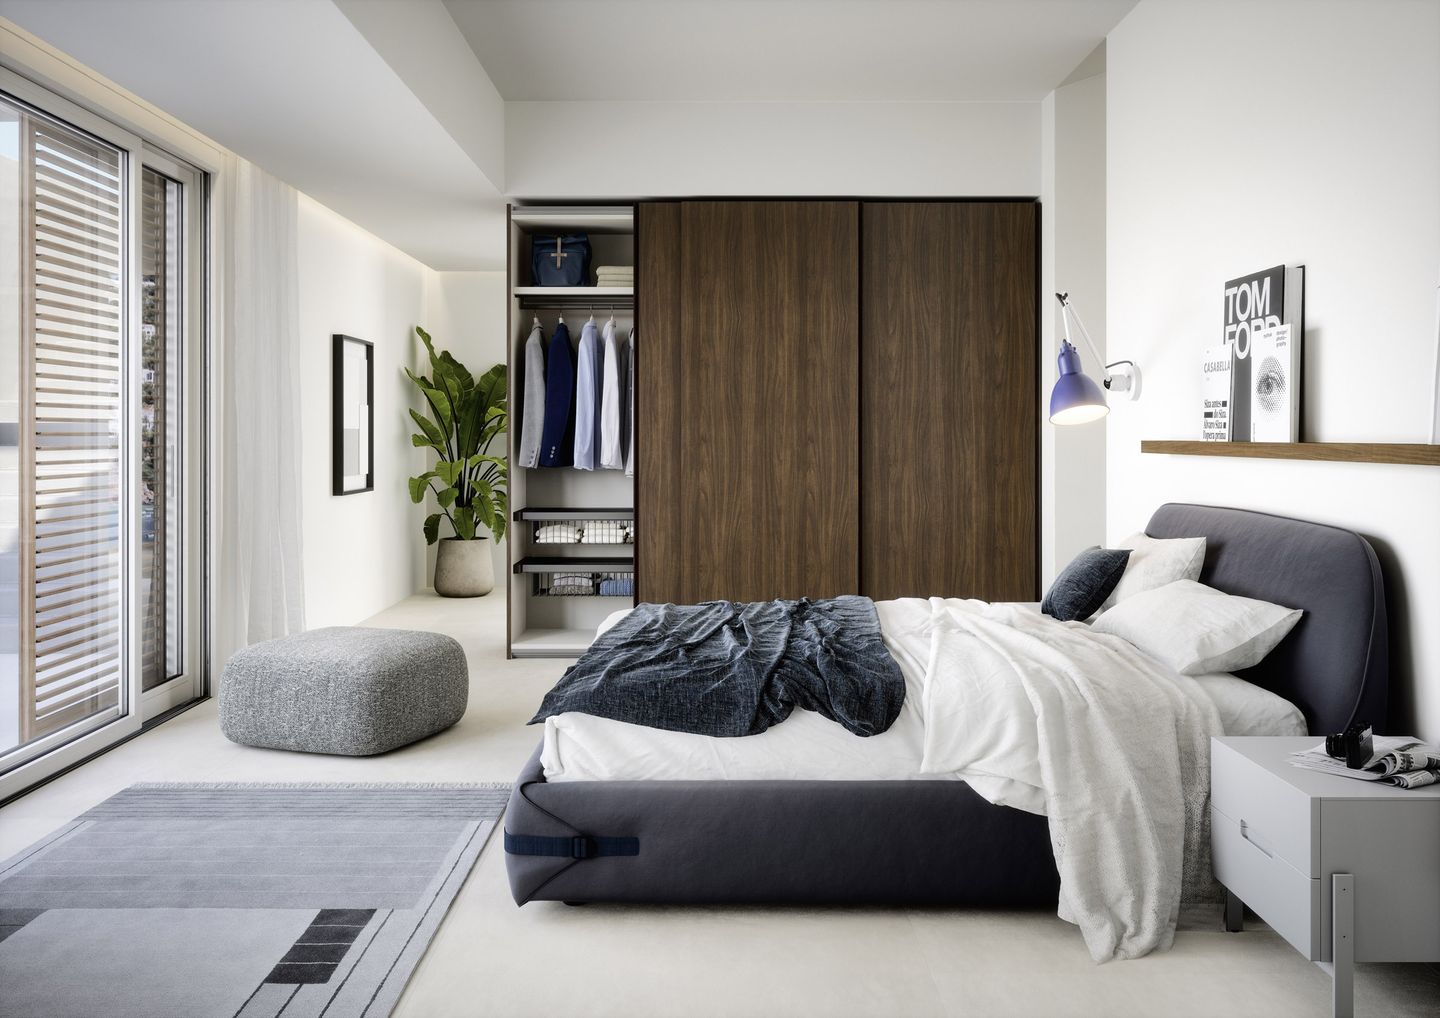 How to furnish a small bedroom with style